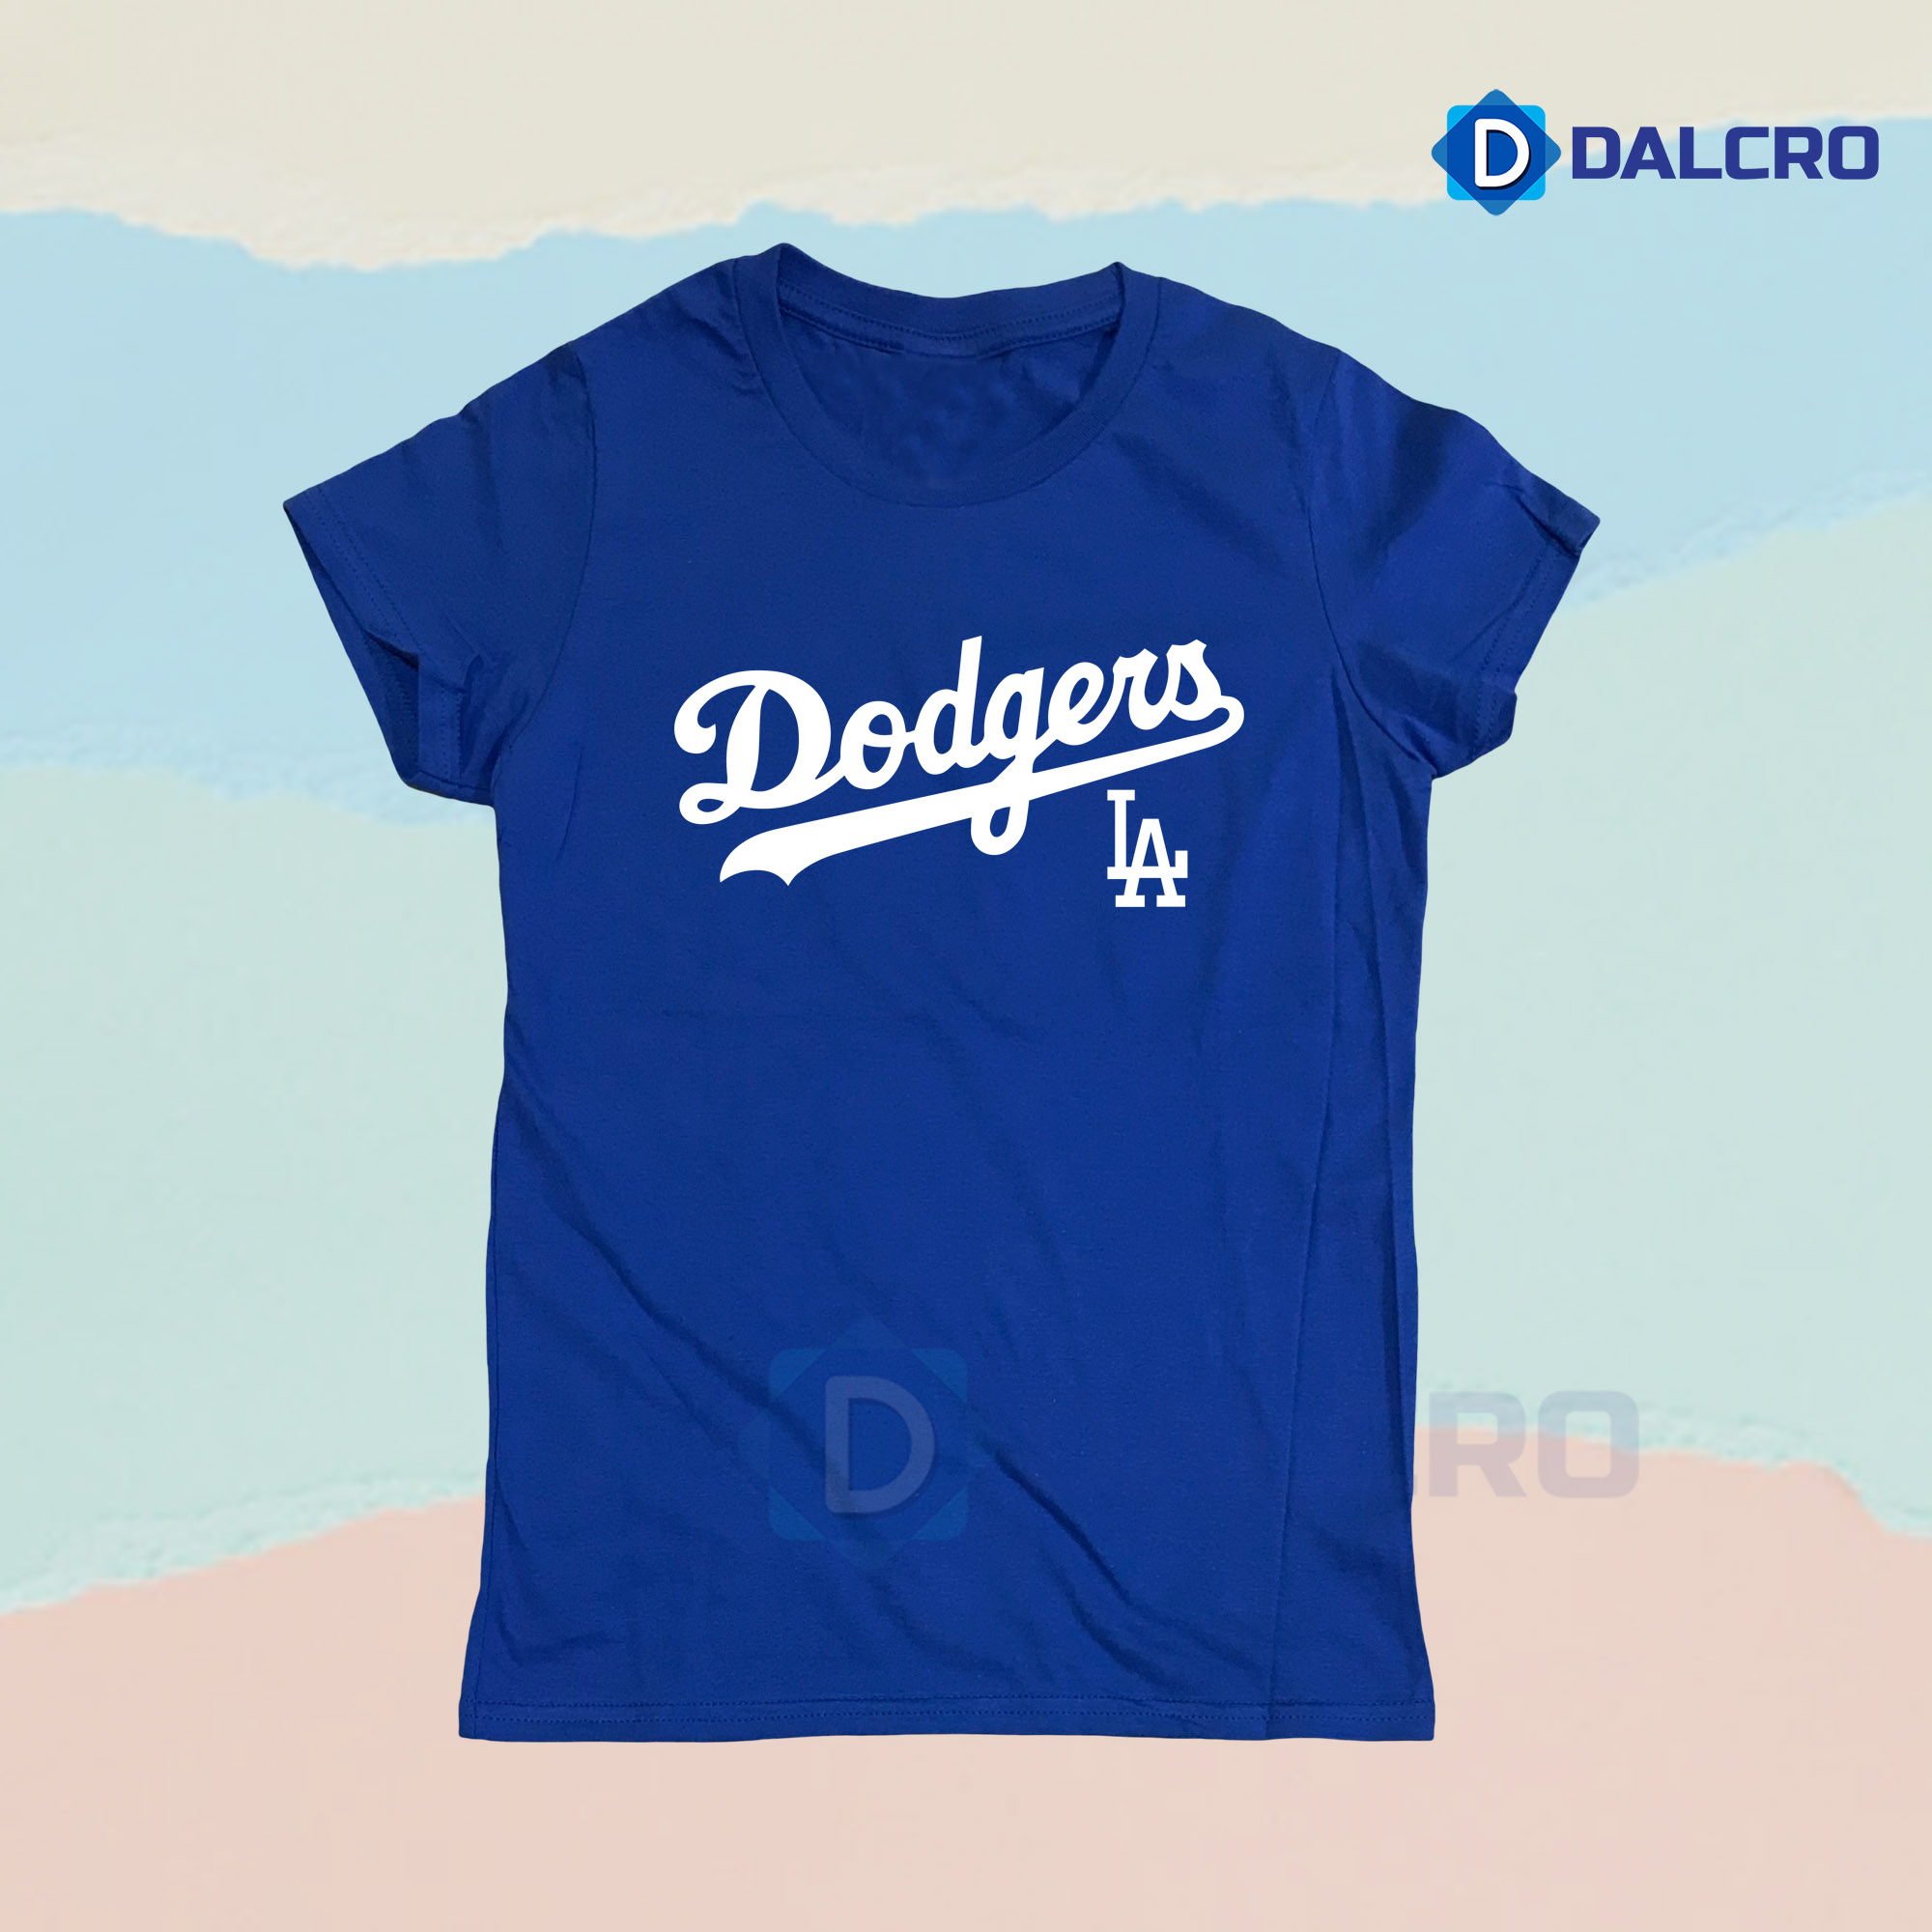 MLB LA Dodgers Men's T-shirt with Embroidery, Rubberized Screen Print  Design tshirt for men, Shirt Tees, Good Quality T-Shirt Sale (Royal Blue)